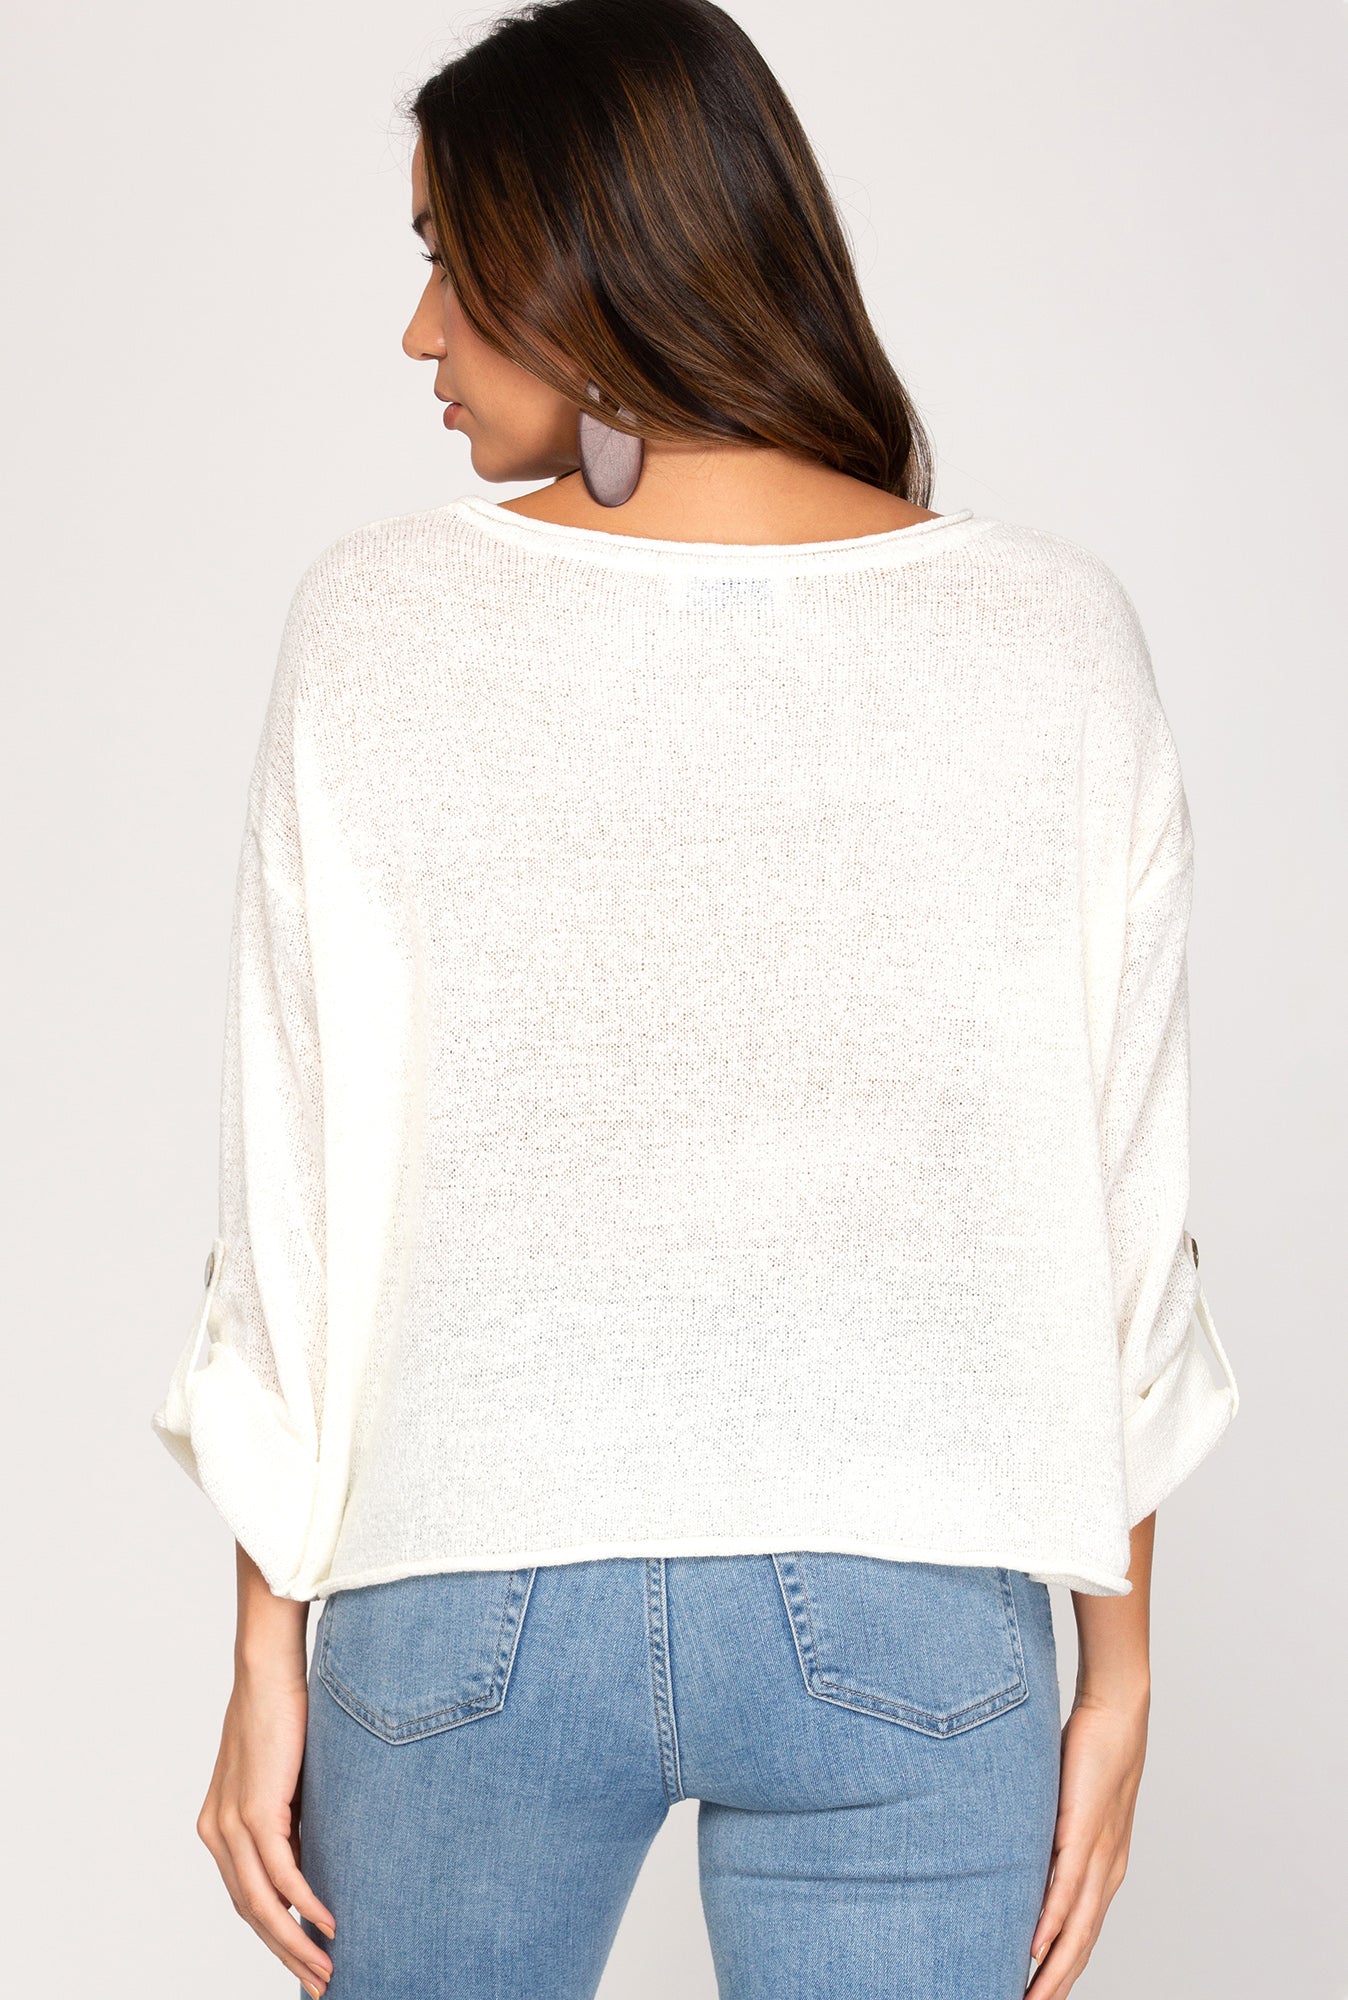 White 3/4 Roll Up Sleeve Knit Sweater